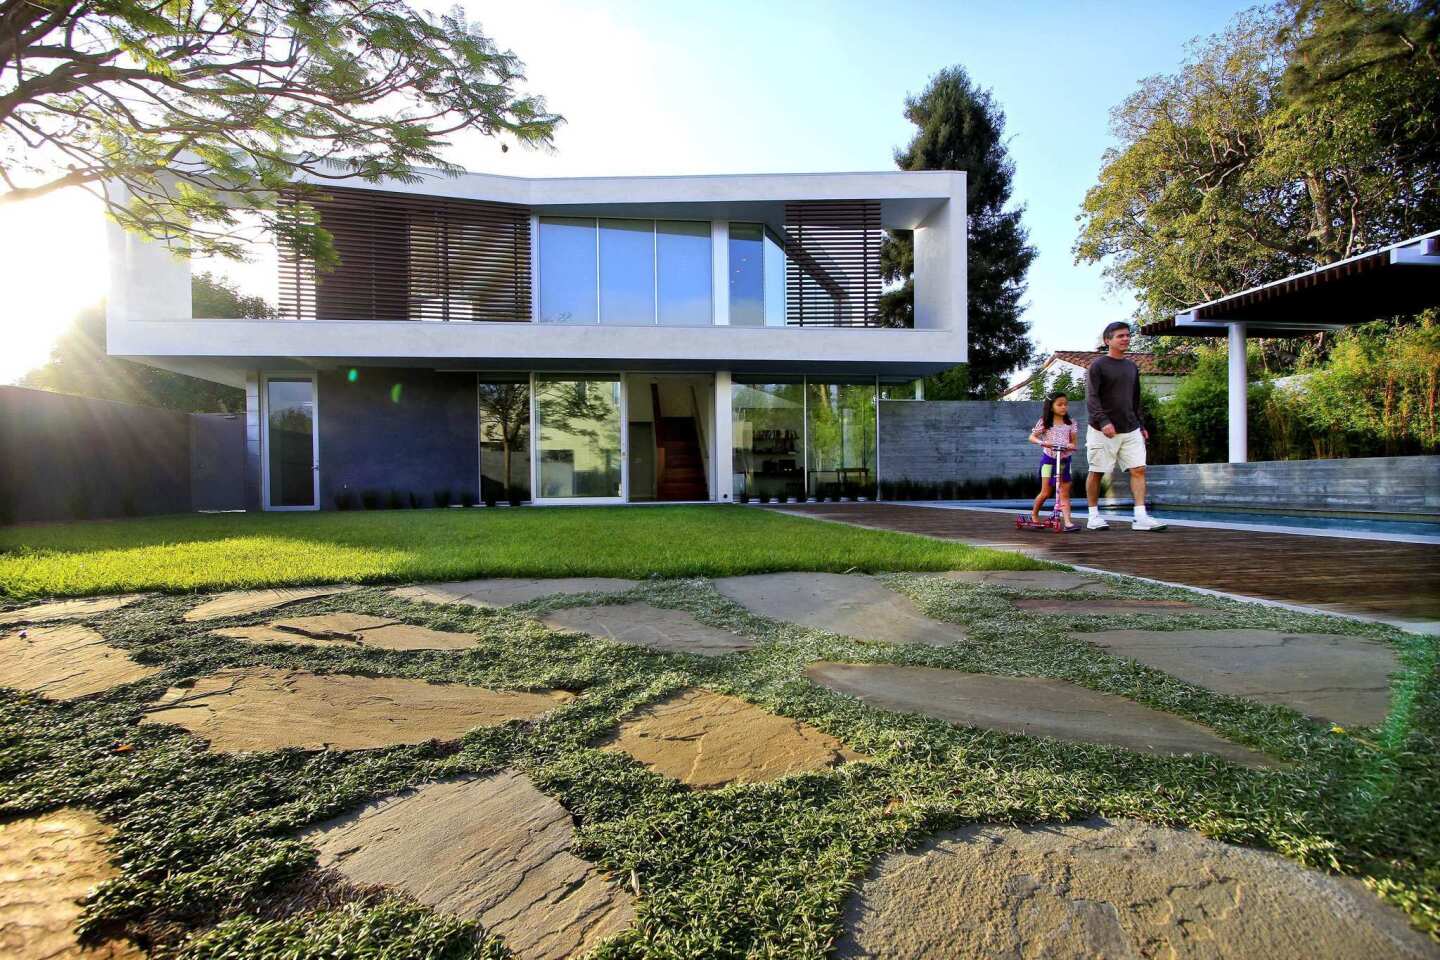 Craig Ehrlich walks with daughter Leah, 7, in front of the new house by architects John Friedman and Alice Kimm.